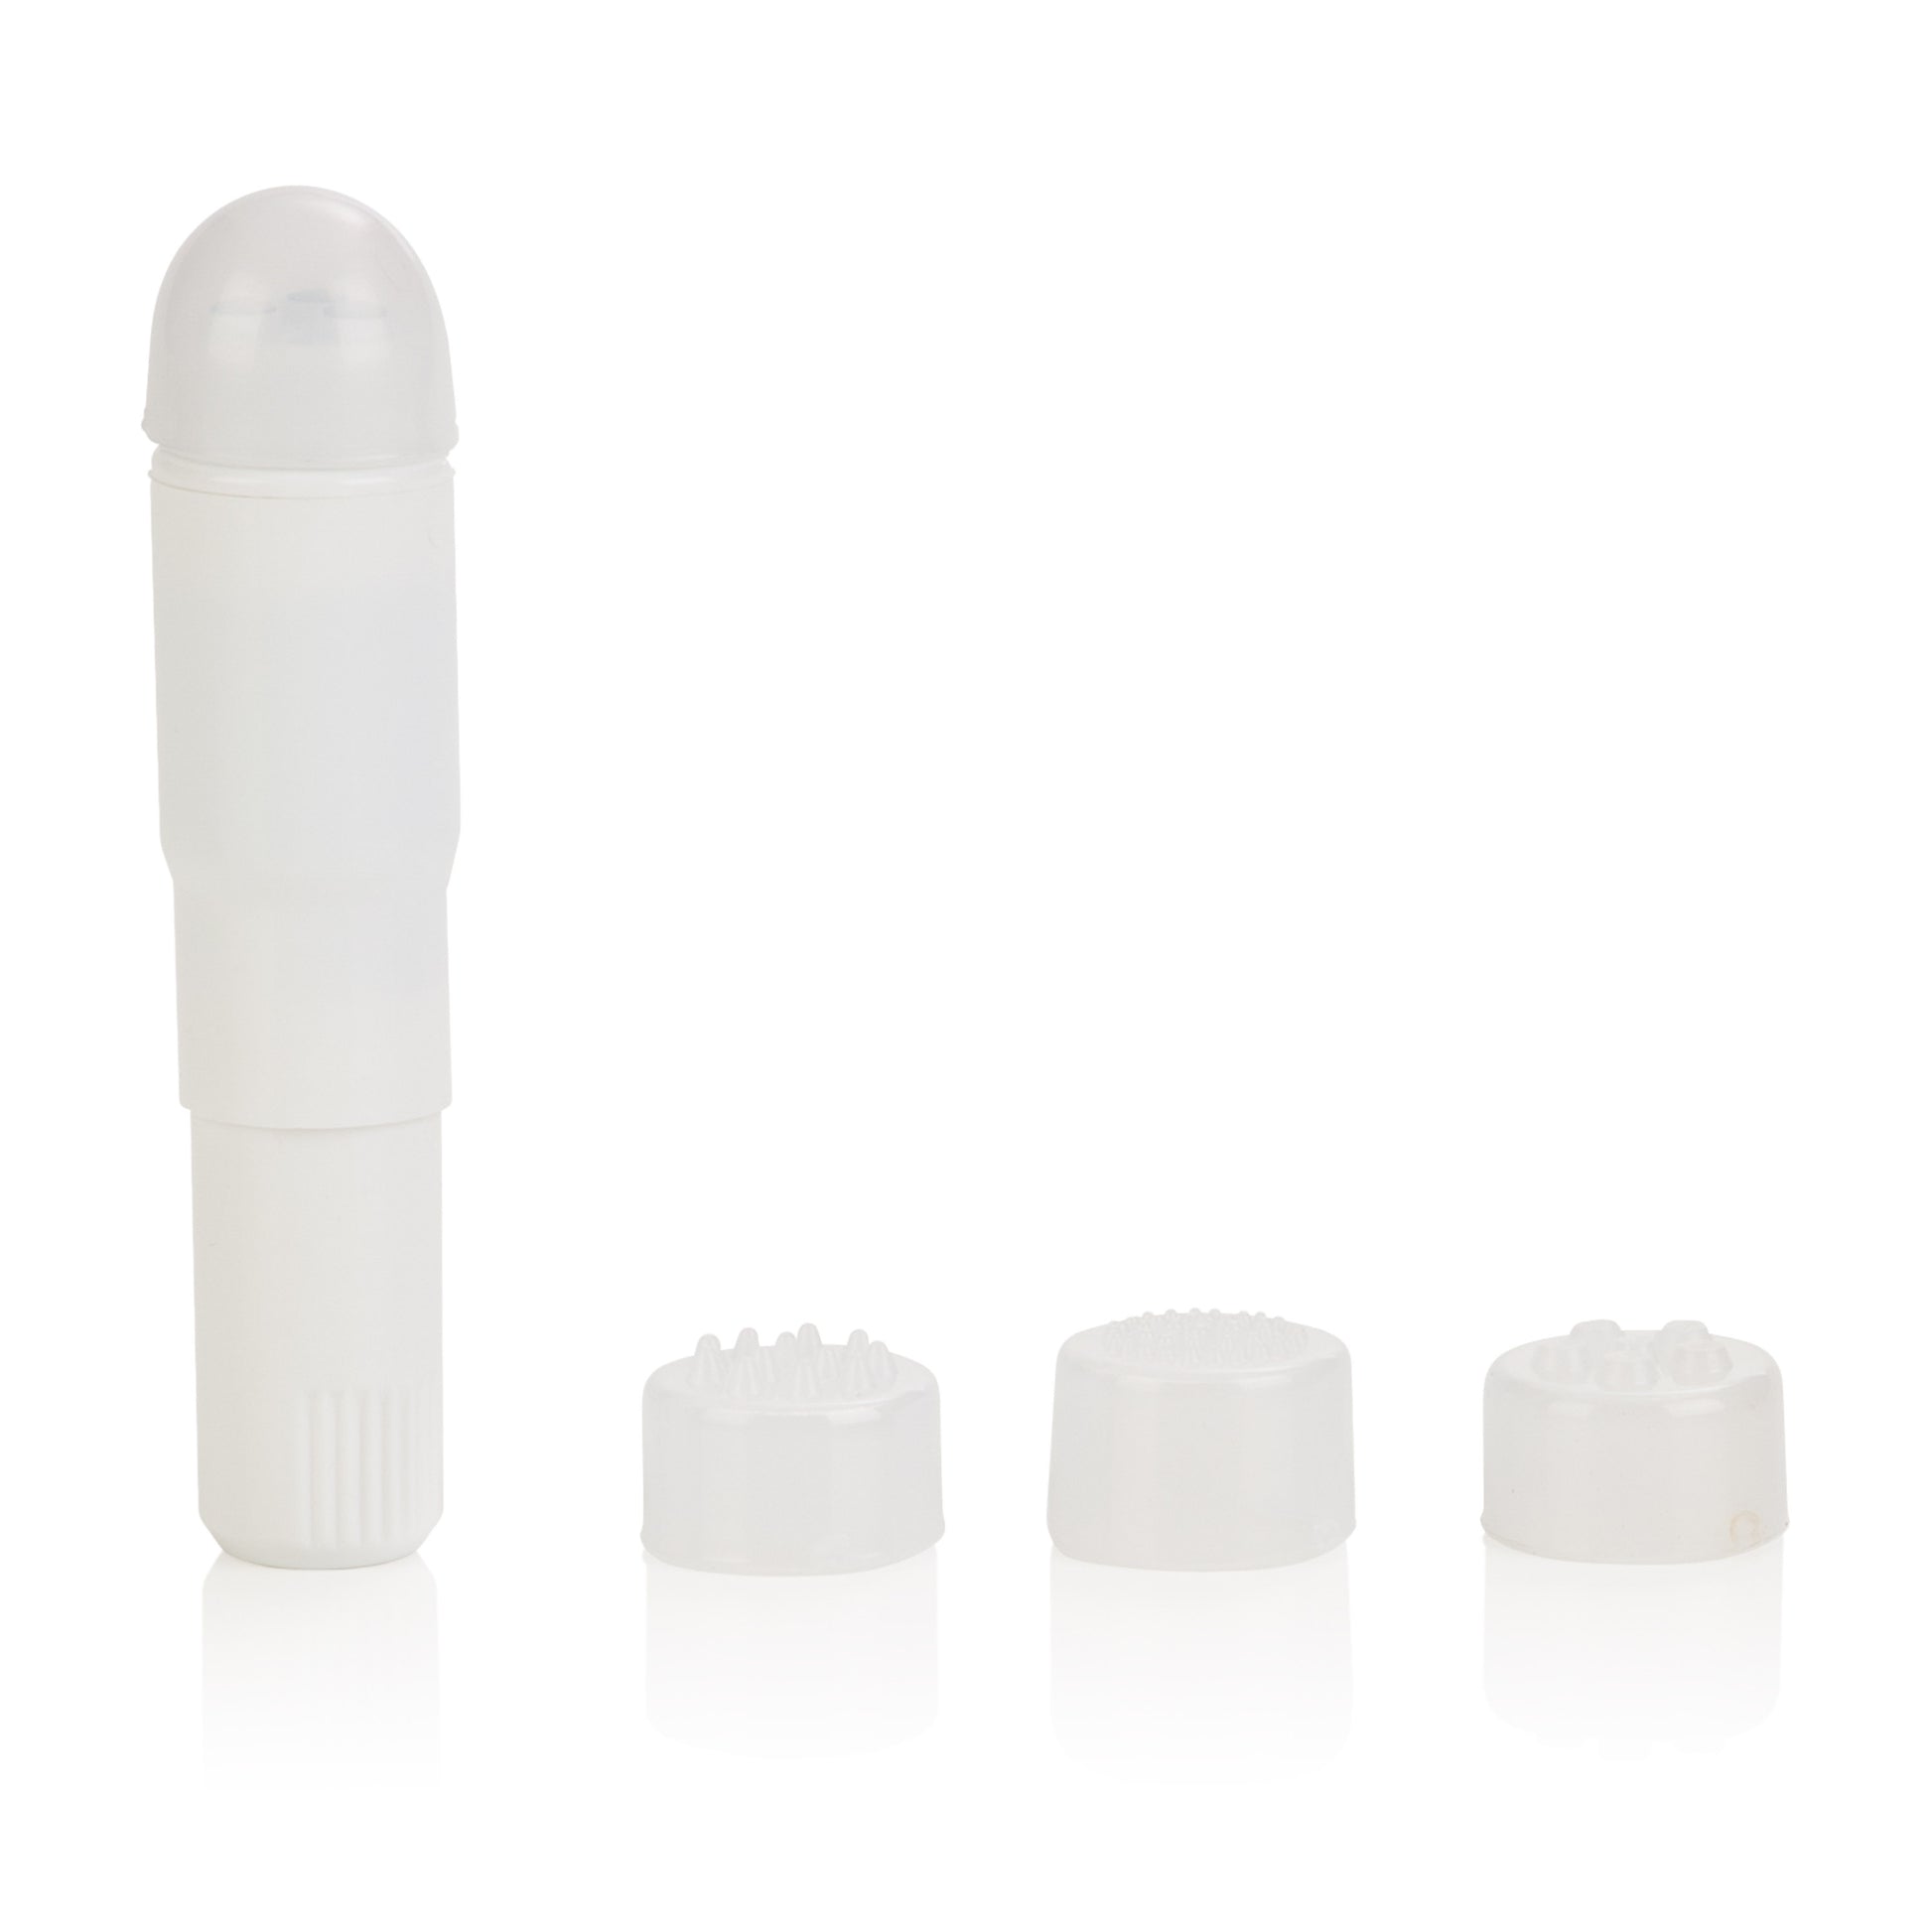 Compact Waterproof Personal Travel Massager With 4 Tips - White SE2104012